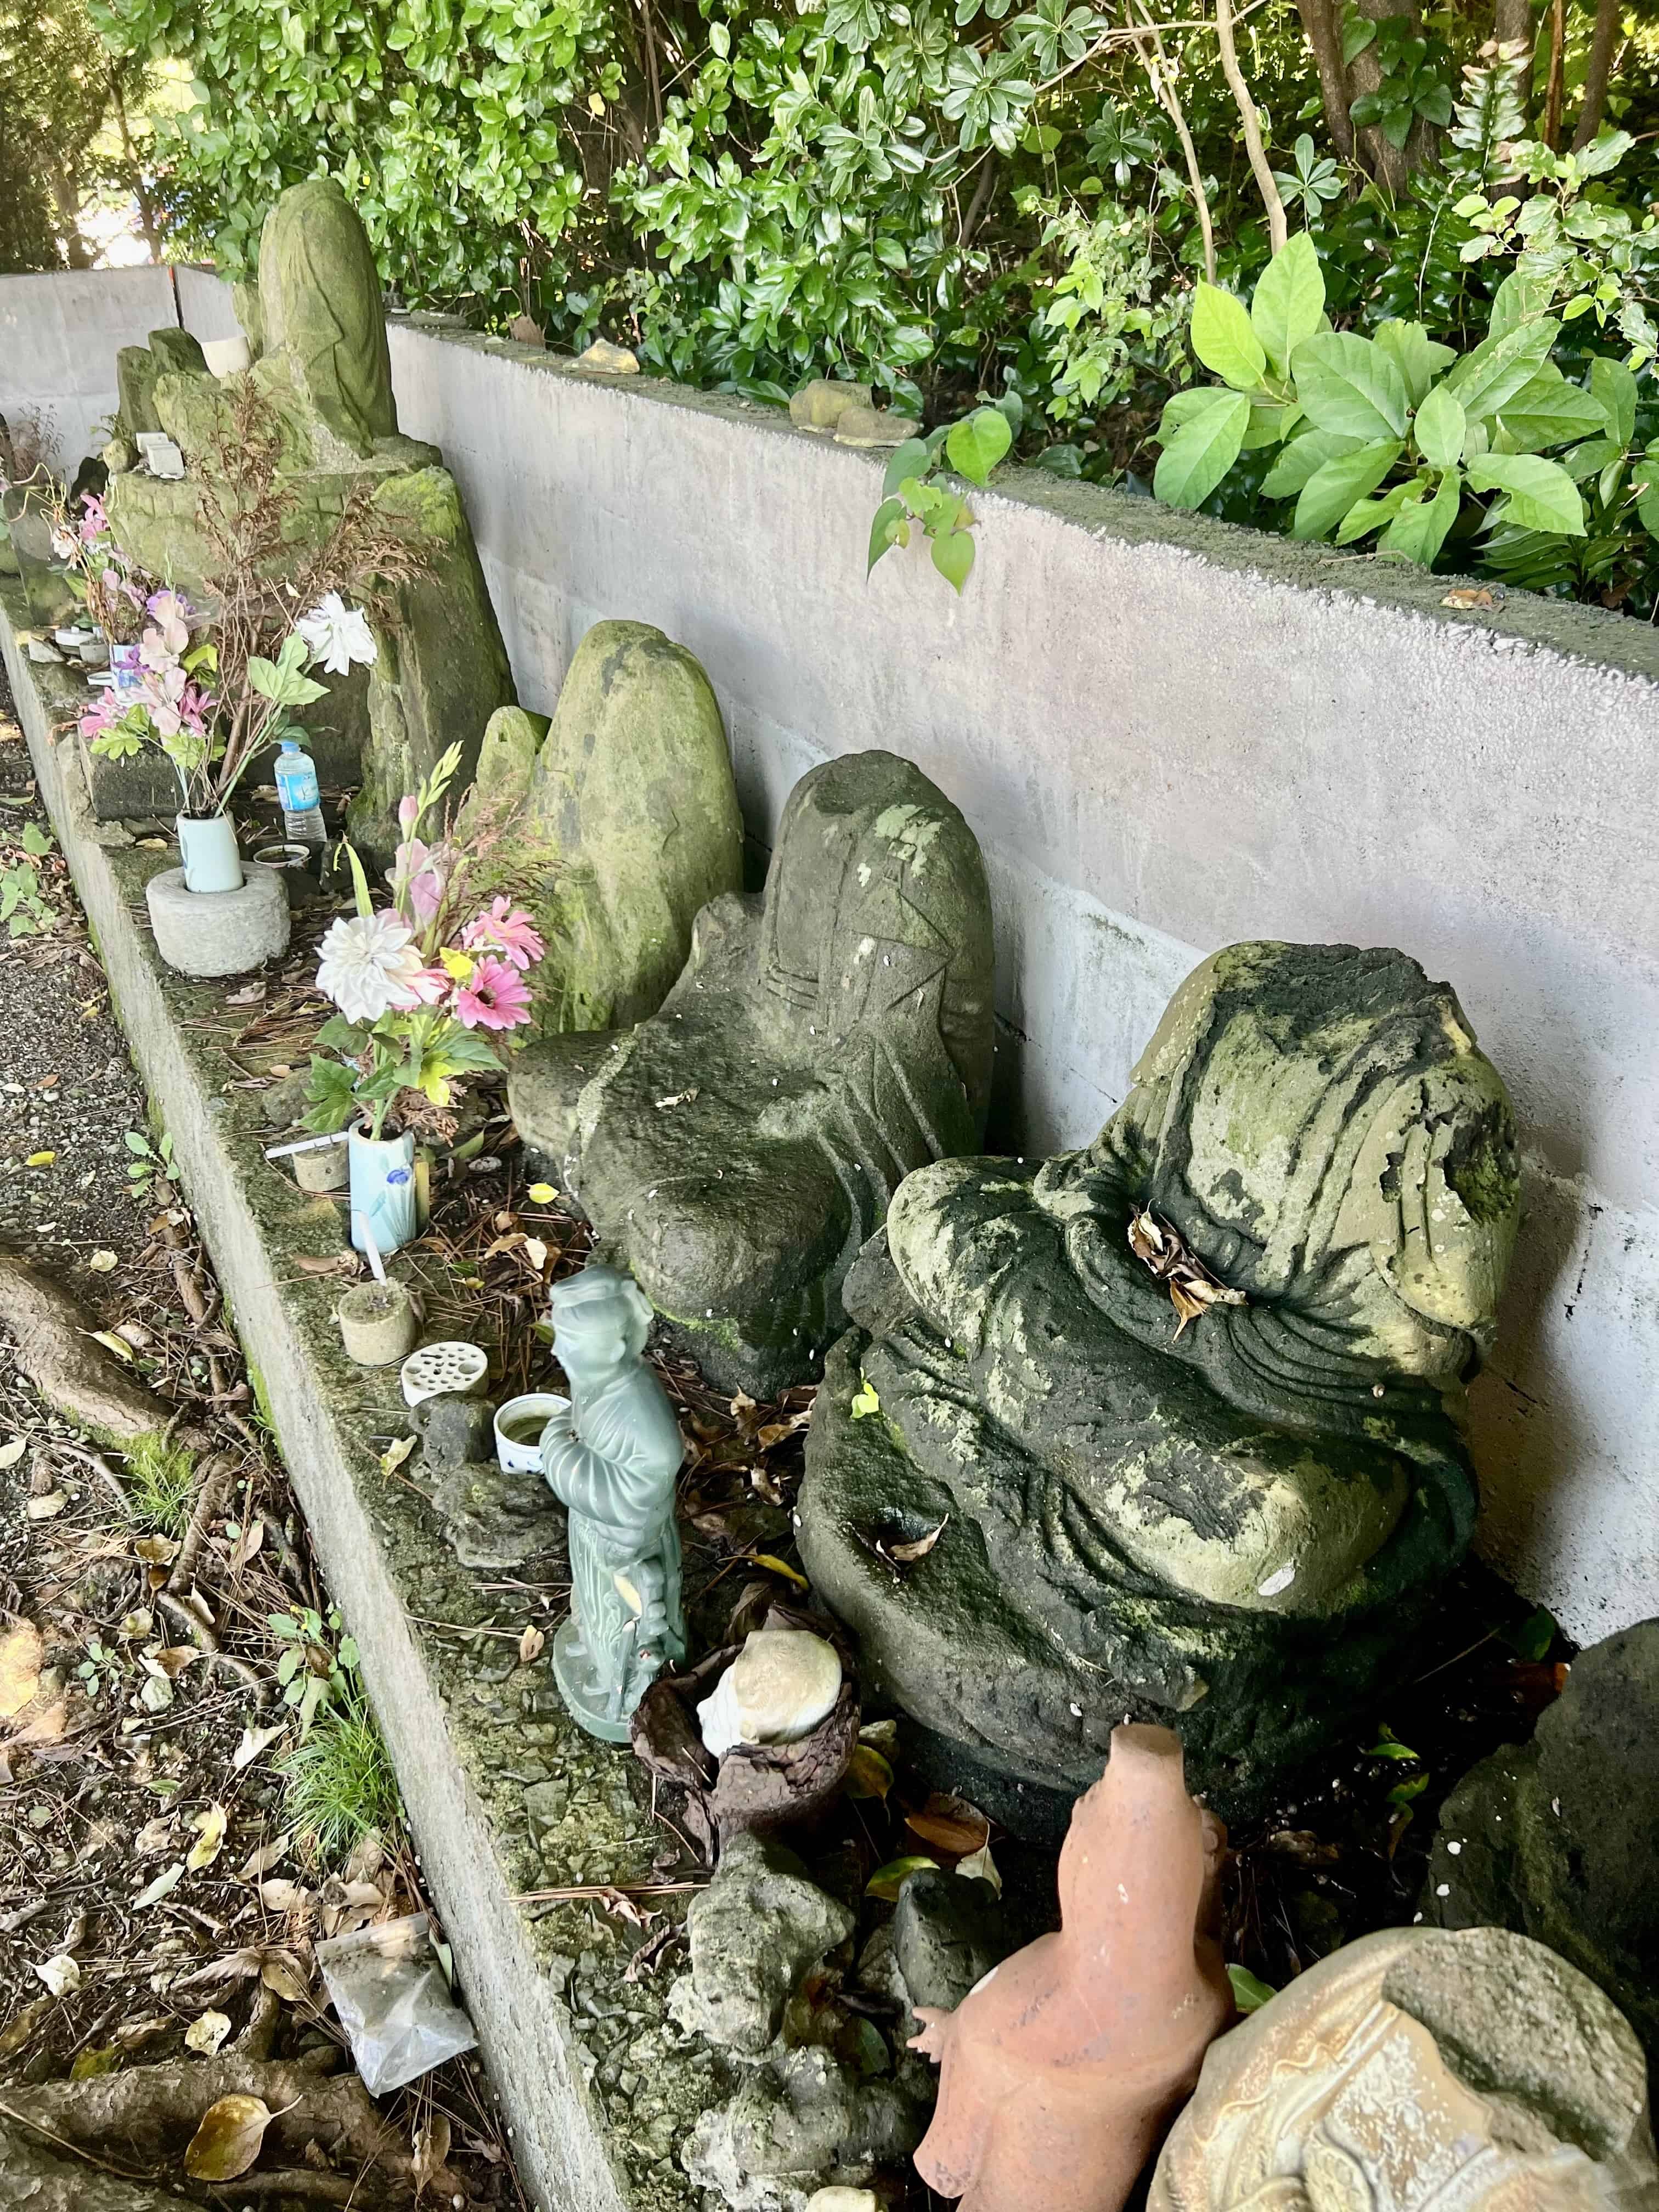 Buddhist statues whose heads have been hacked off during the persecution of Buddhism at the beginning of the Meiji period.